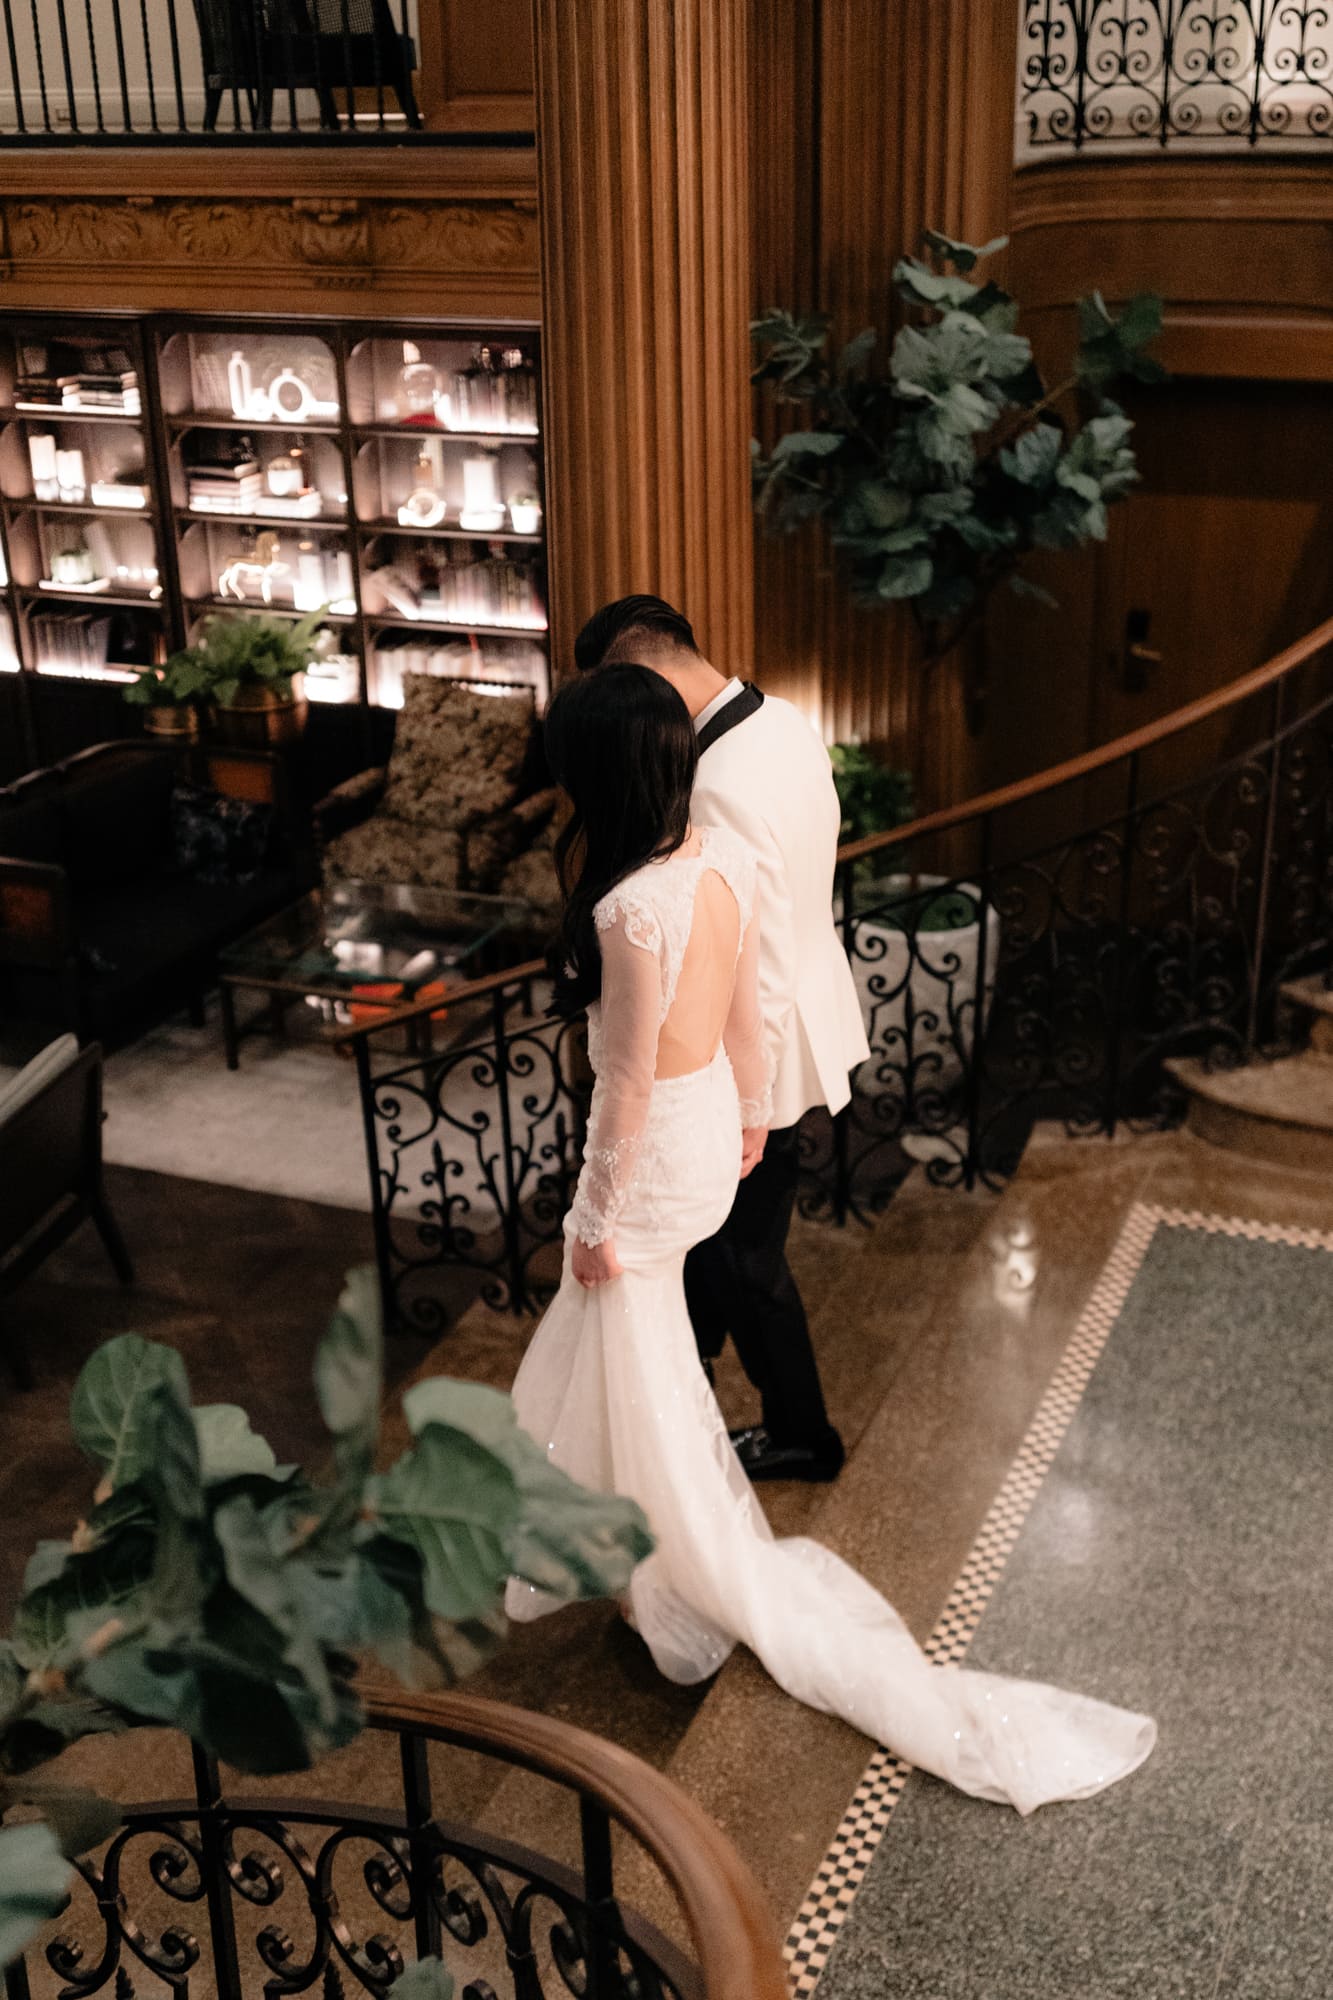 A wedding couple walking through Olympic Bar at Fairmont Olympic Hotel in Seattle.